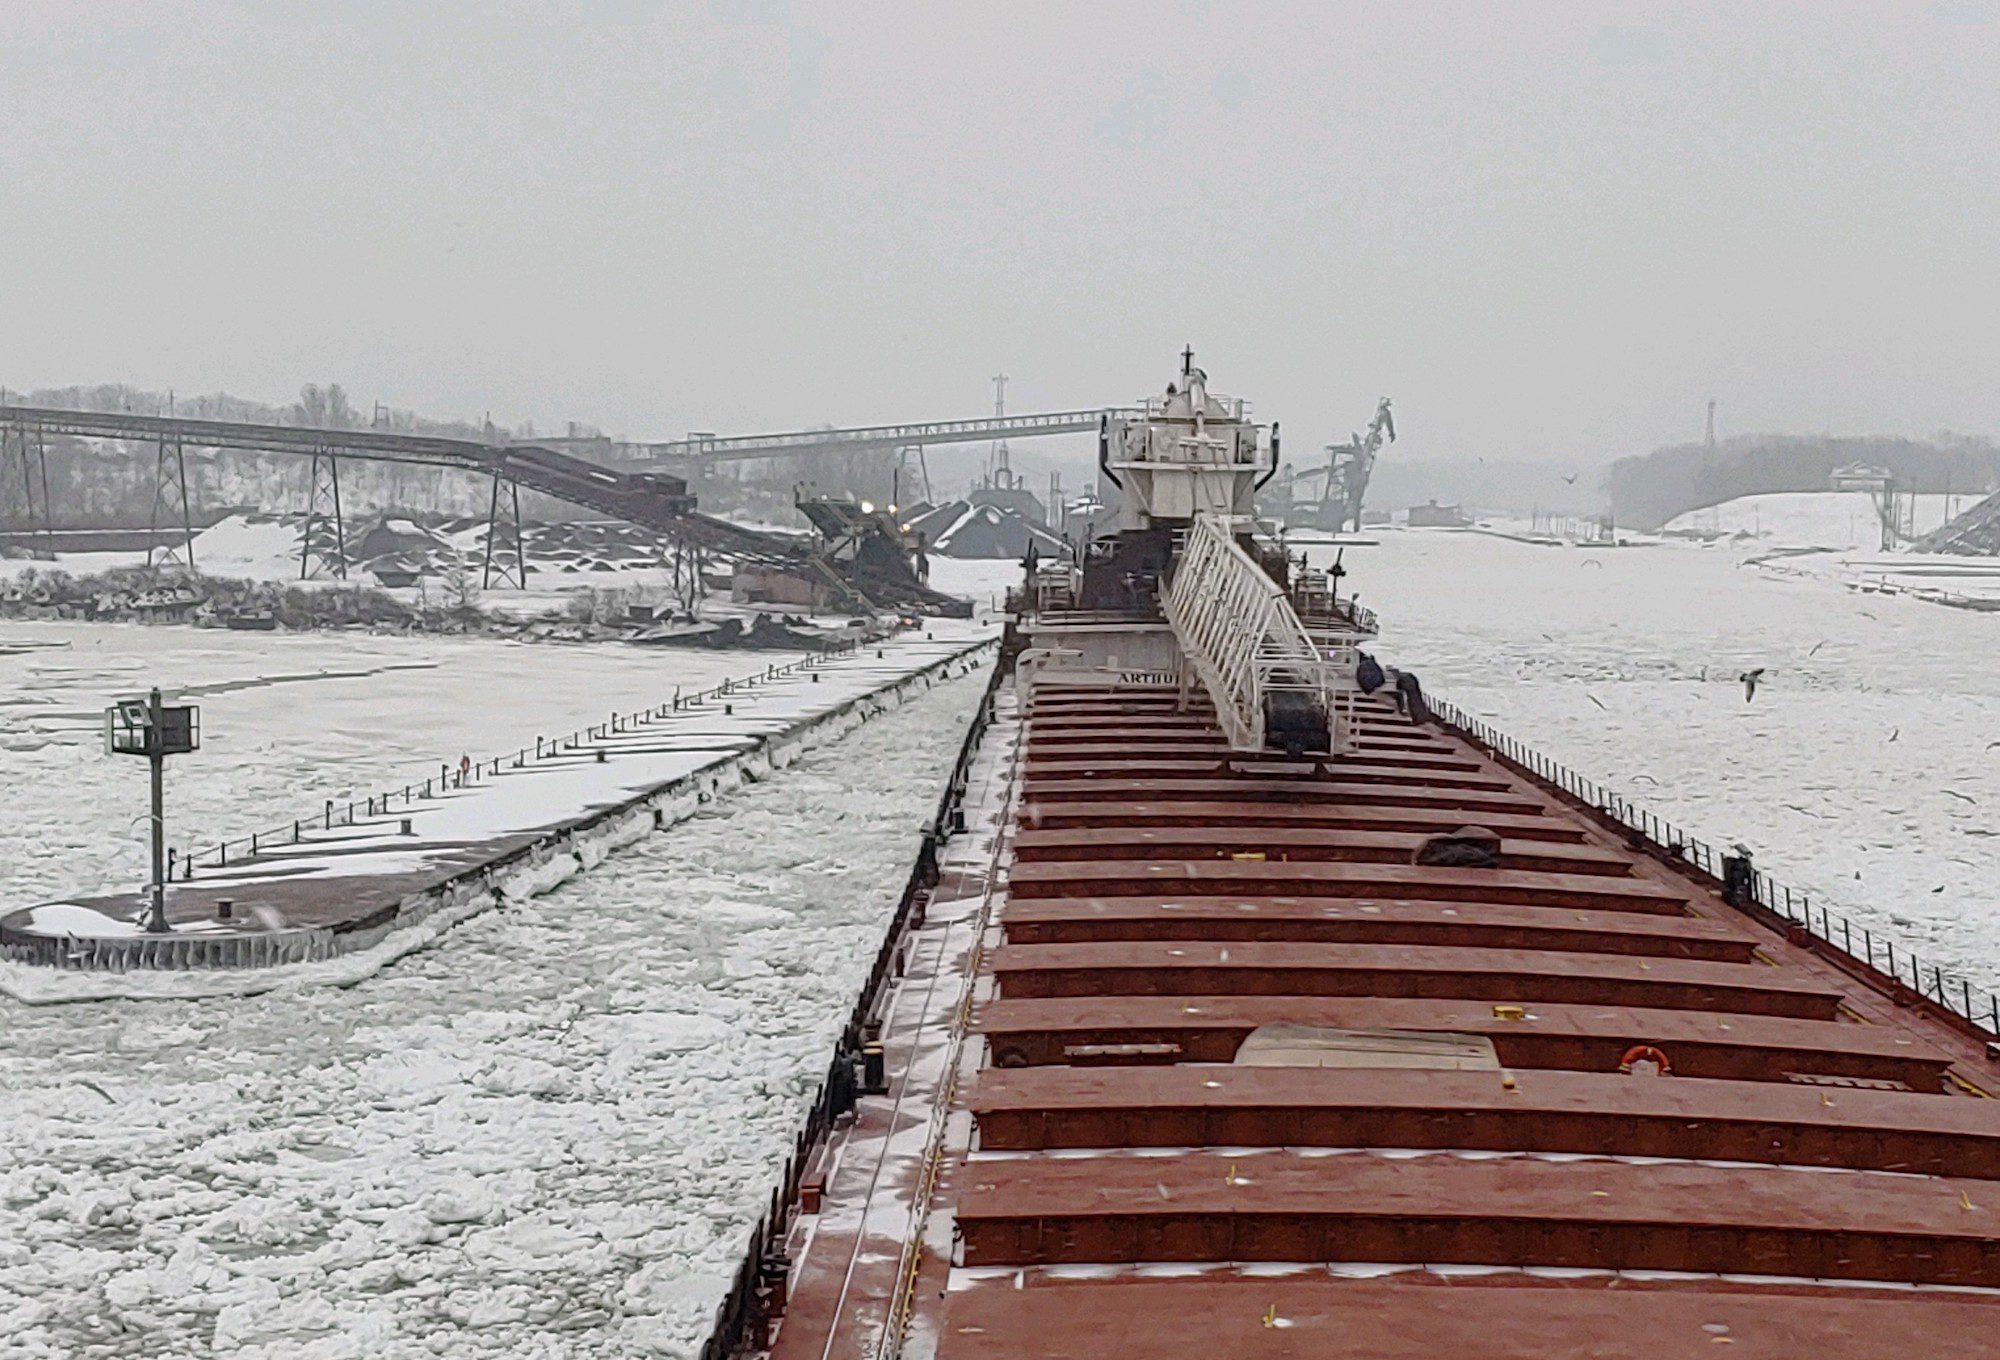 Lack of Coast Guard Icebreakers Disrupts Shipping on Great Lakes, Says Task Force